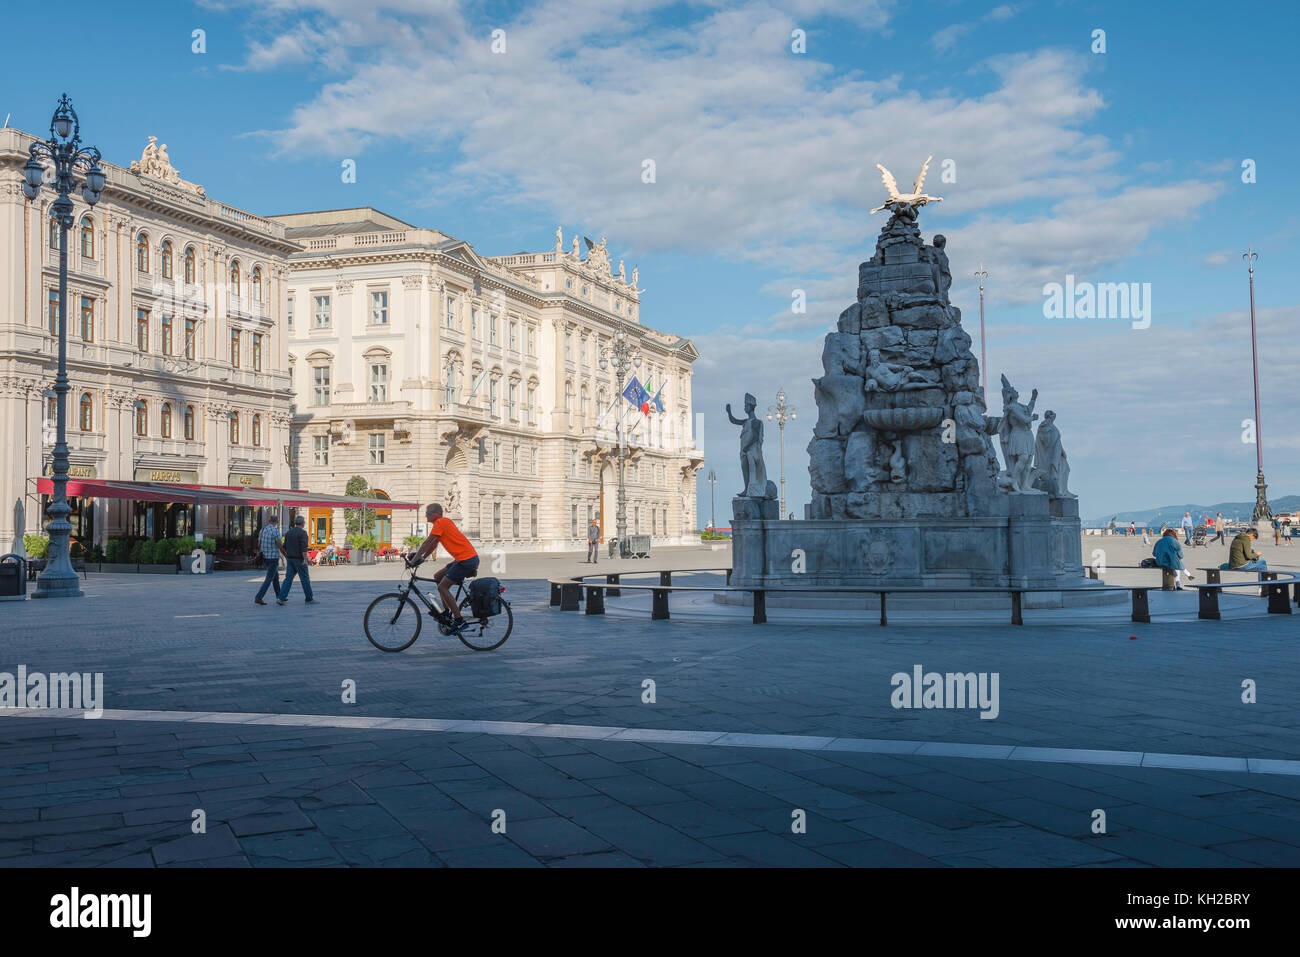 Trieste Italy, view of the Piazza Unita d'Italia in the centre of the city of Trieste, Italy. Stock Photo